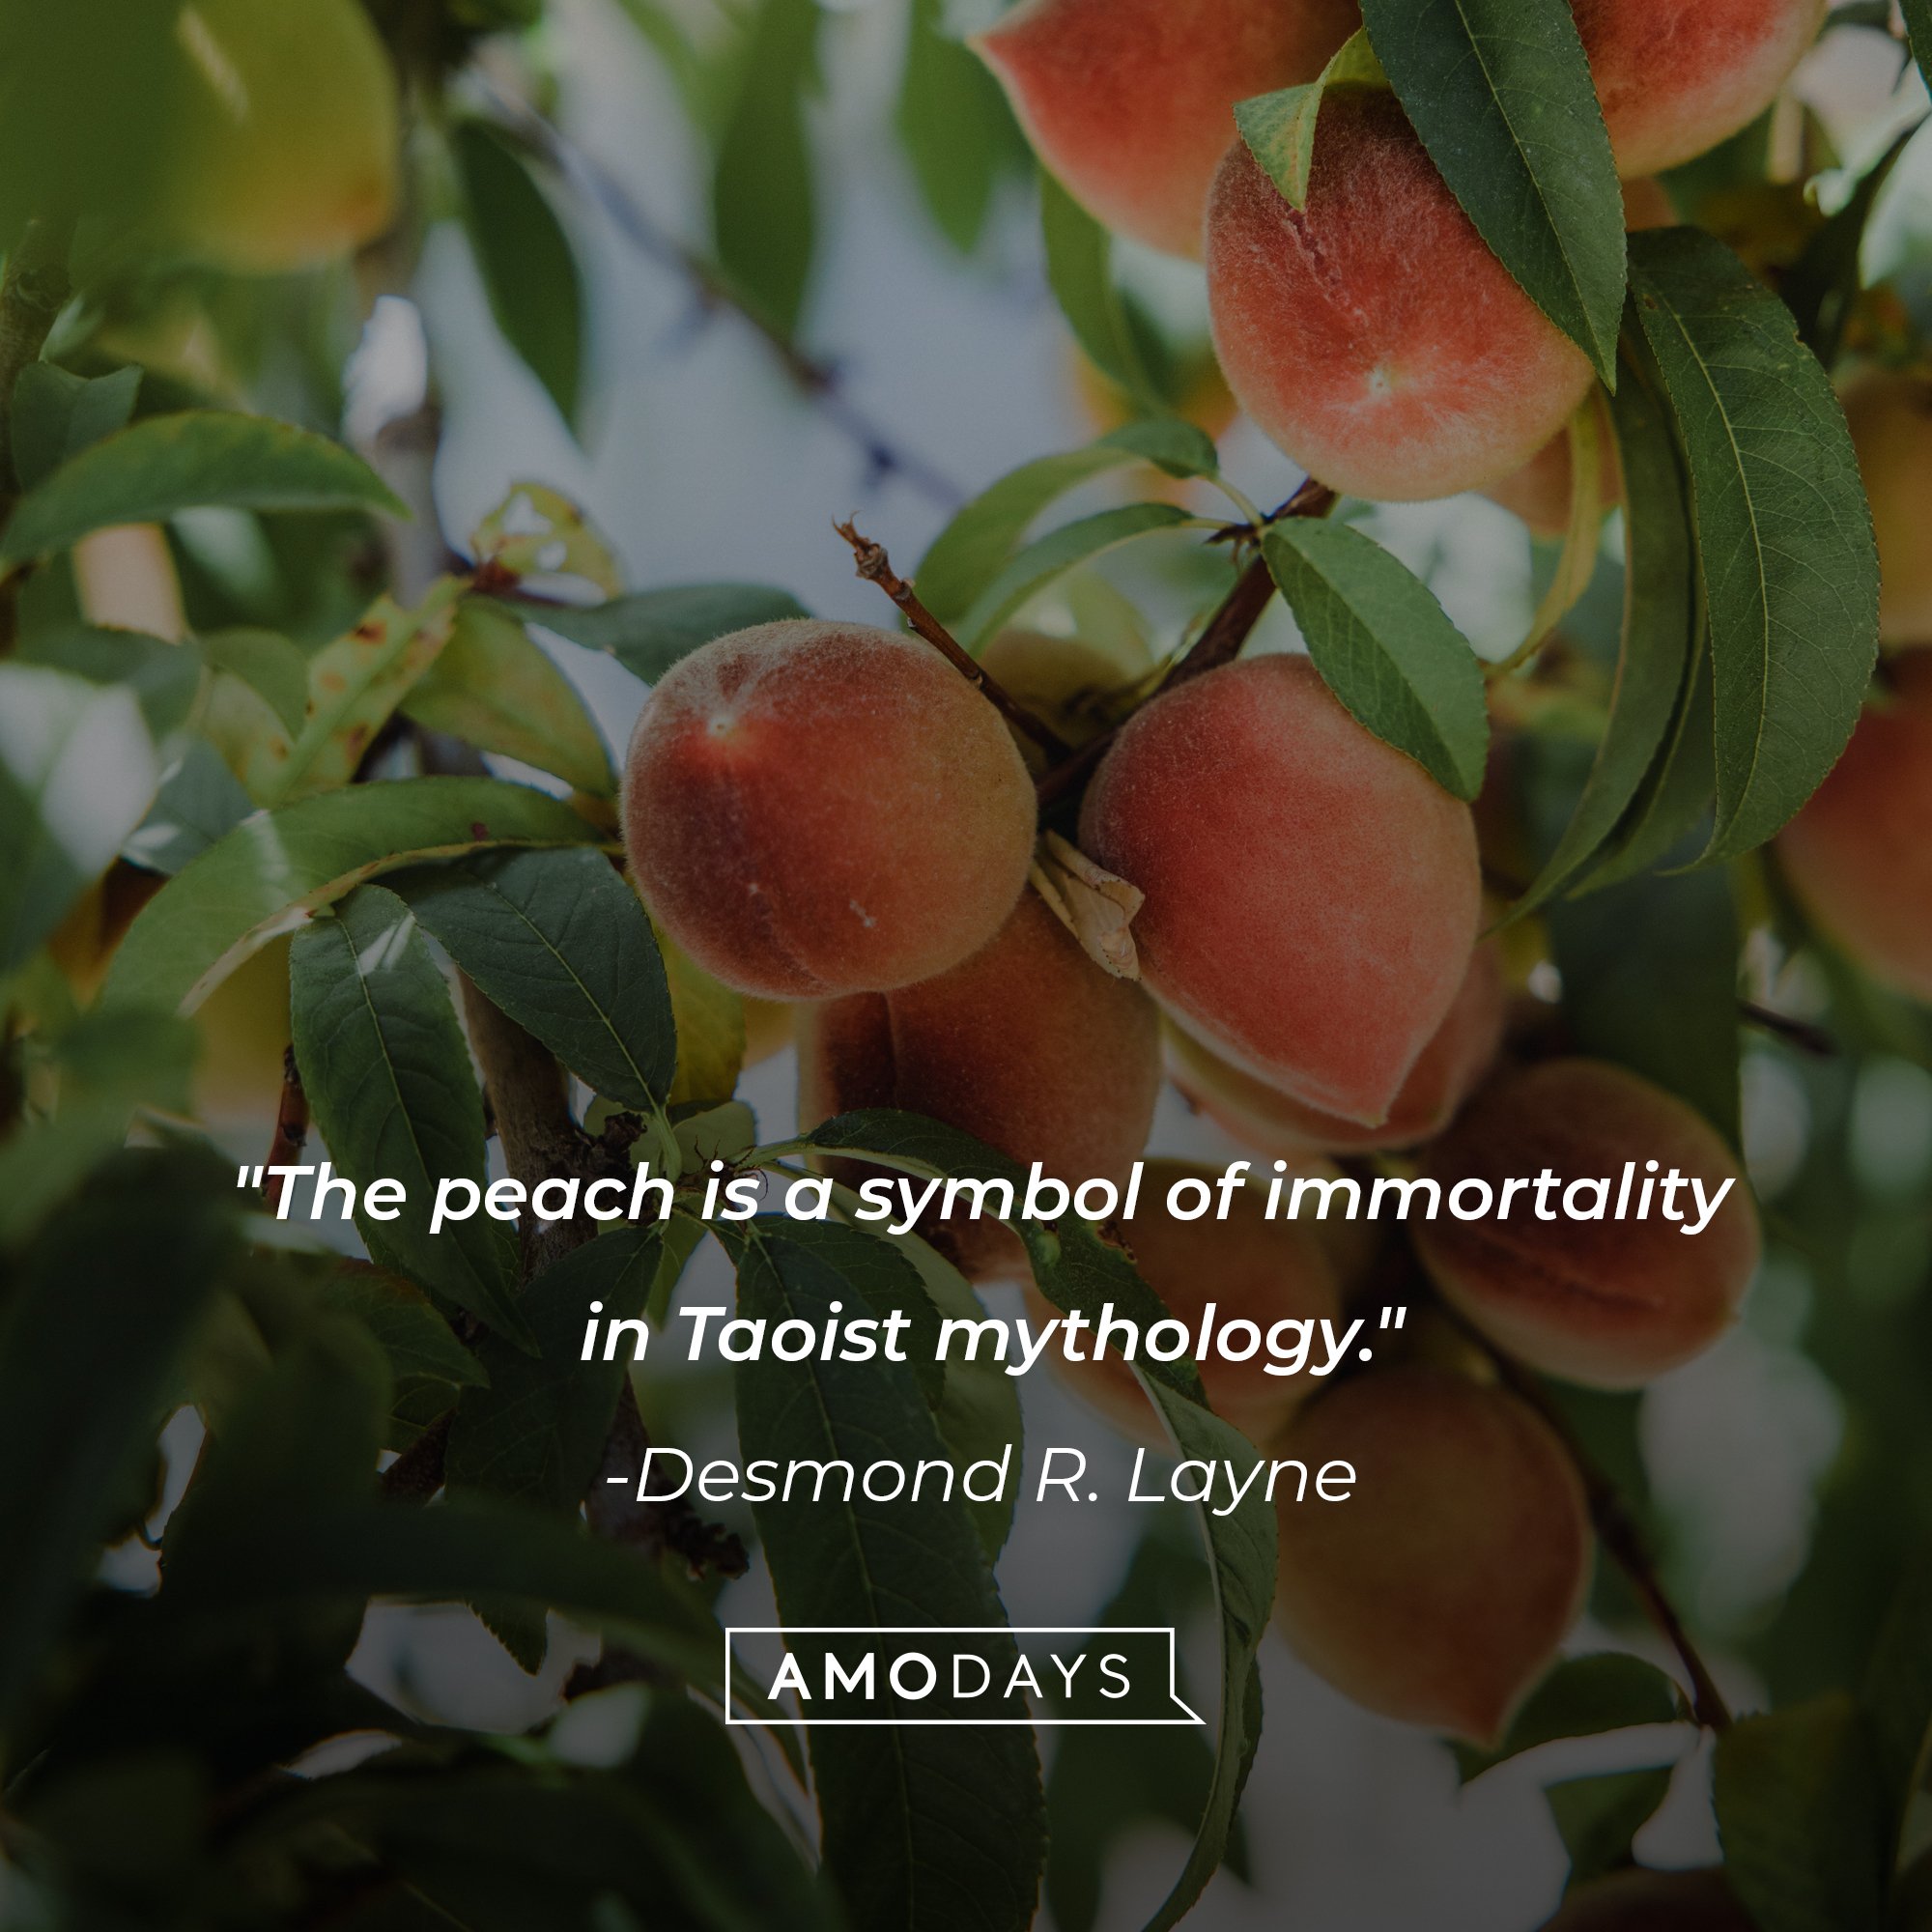 Desmond R. Layne's quote: "The peach is a symbol of immortality in Taoist mythology." | Image: AmoDays